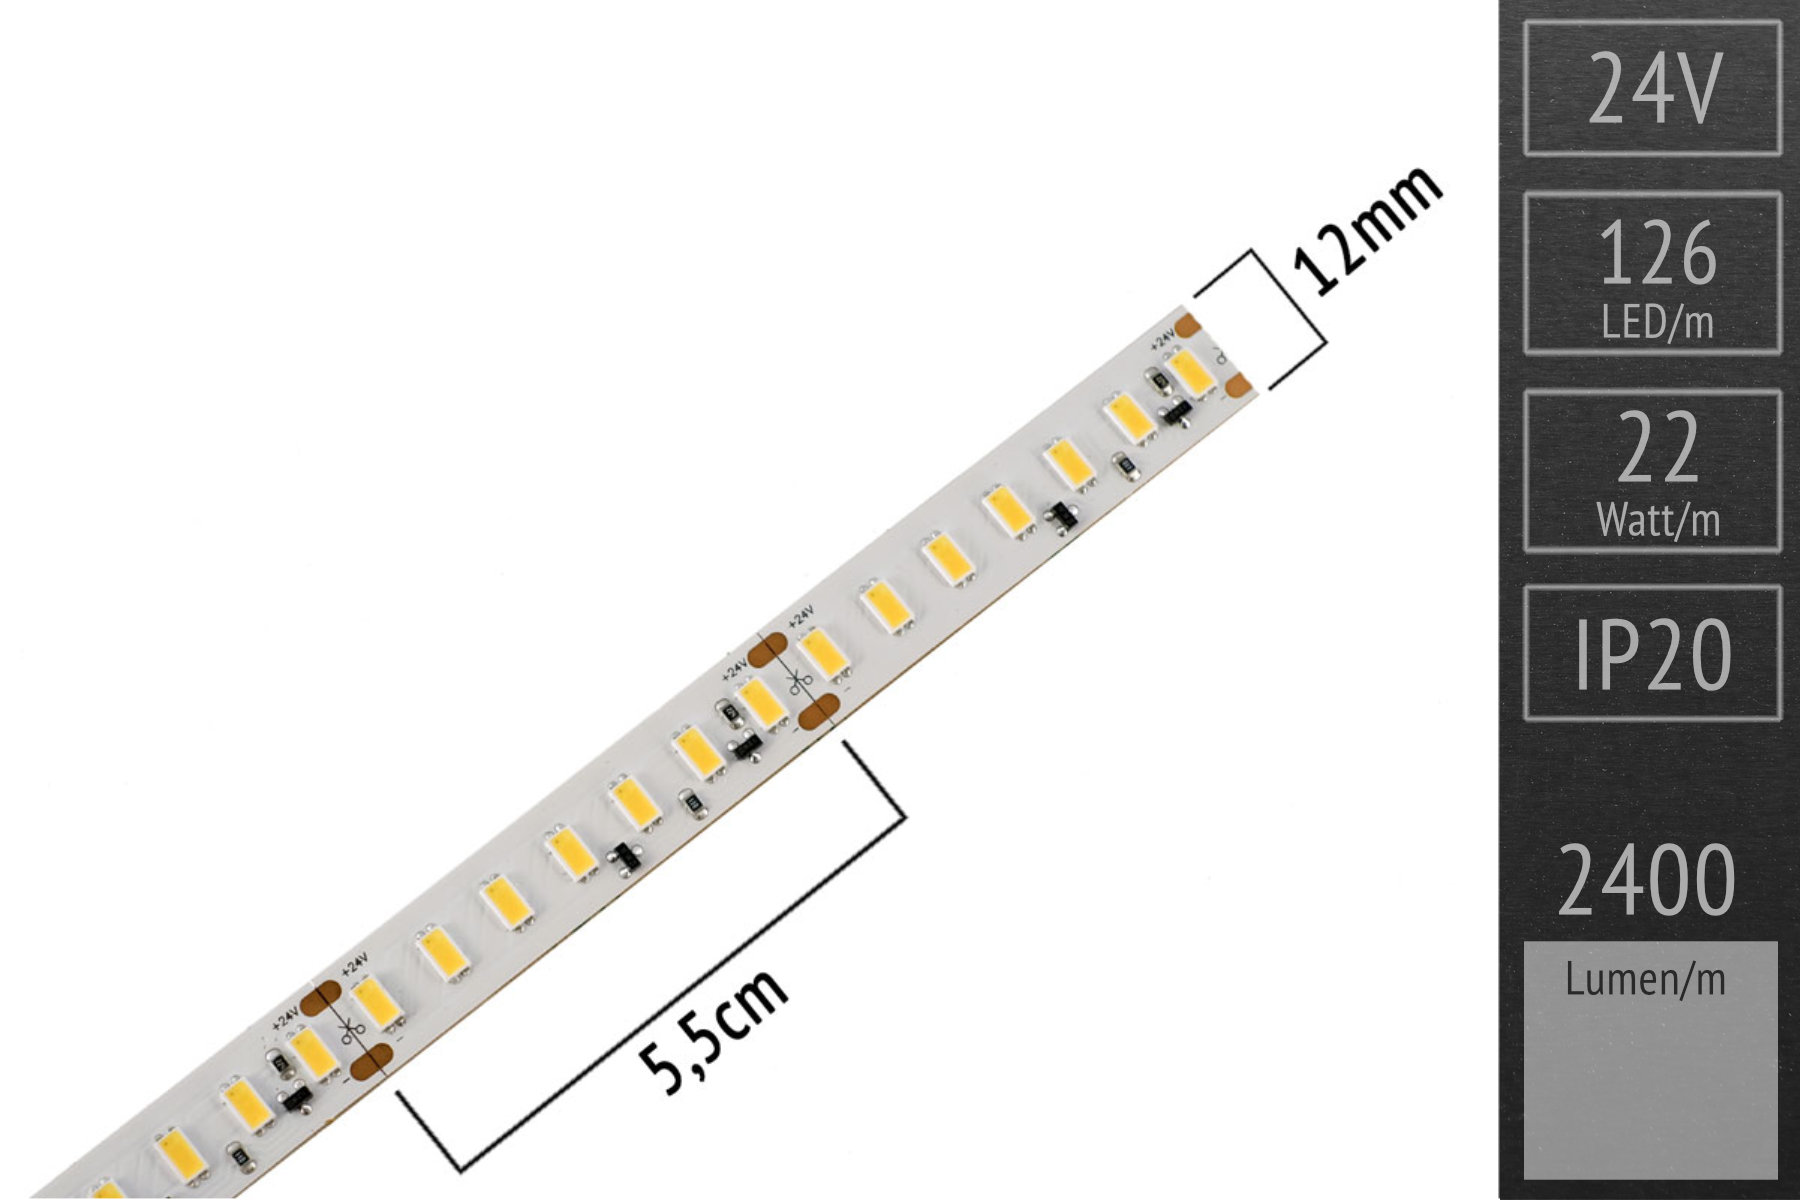 Highest colour quality with CRI>95: LED strip 5630 - 126 LED/m - 2,500 lm/m - 6.000K cool white - IP20 5m roll